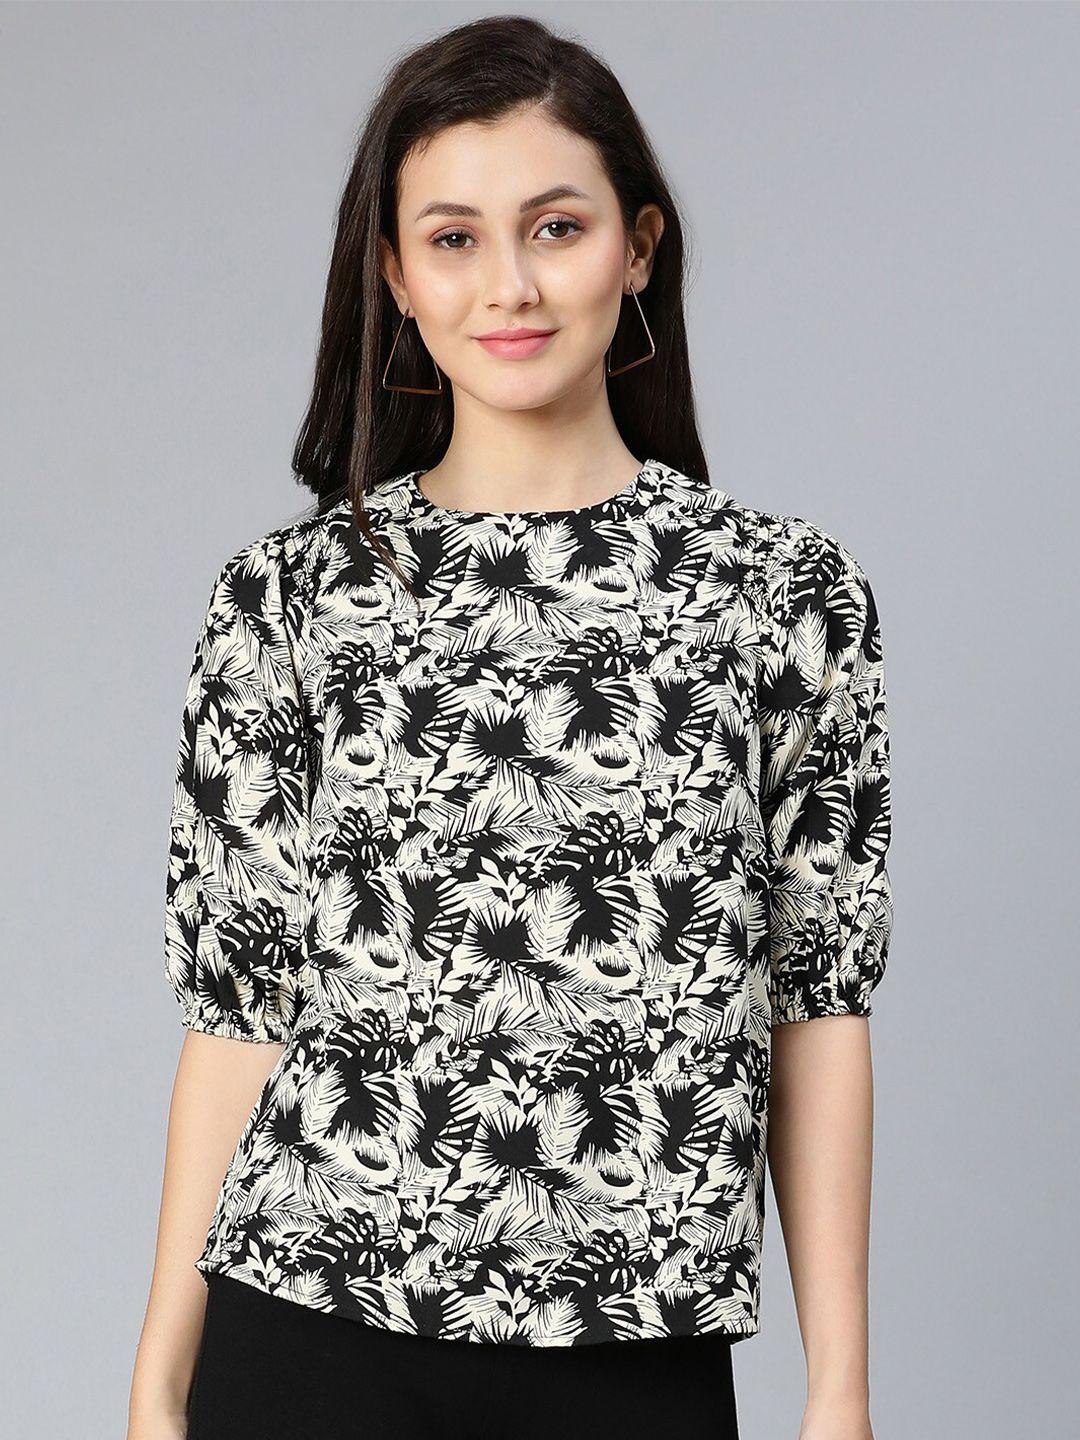 oxolloxo-black-floral-print-crepe-top